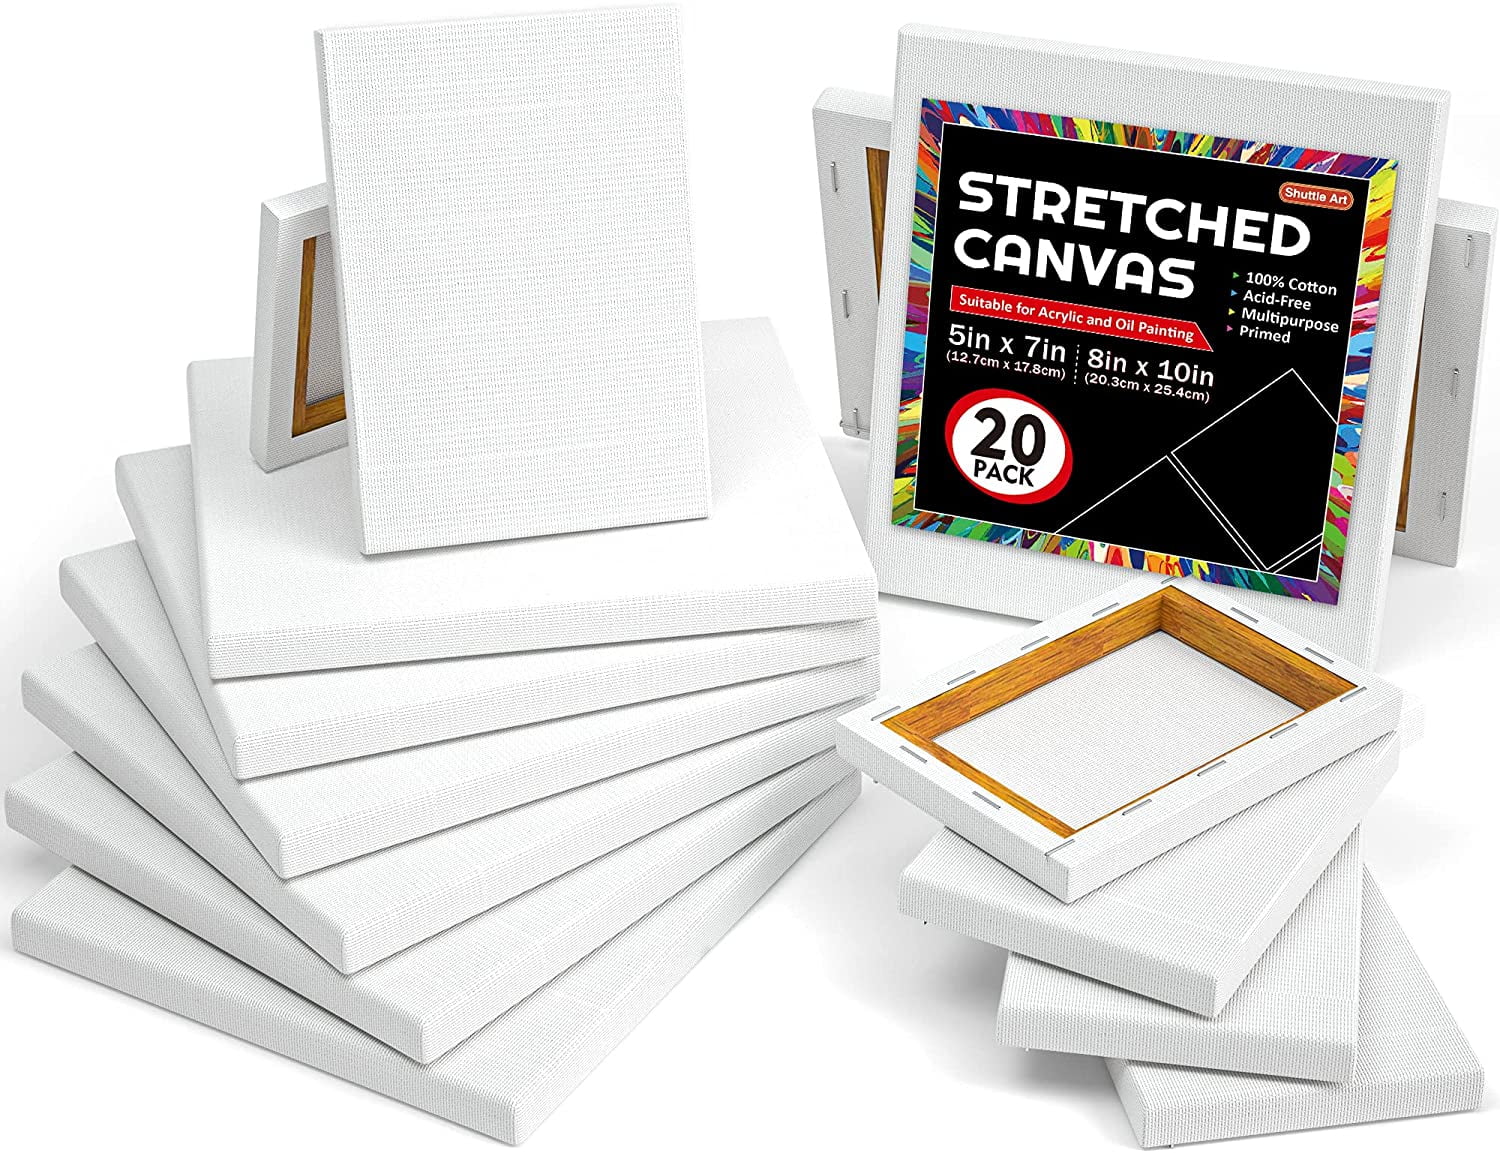 Stretched Artist Canvas, 11 x 14 inches, White, 2 count, Mardel